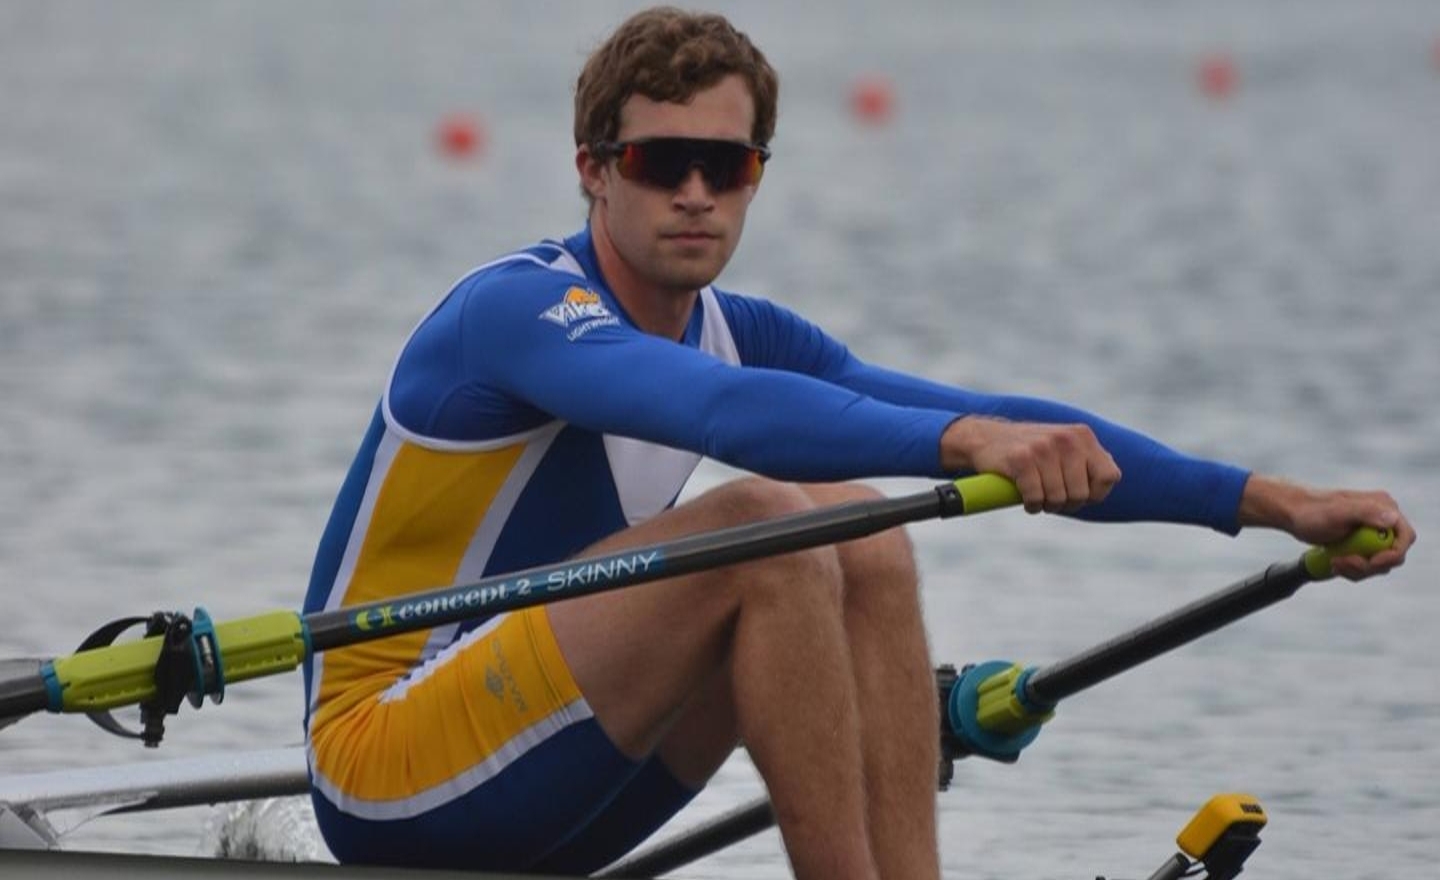 Giancarlo wearing sunglasses sits in his rowing shell ready to stroke on a lake with course markers